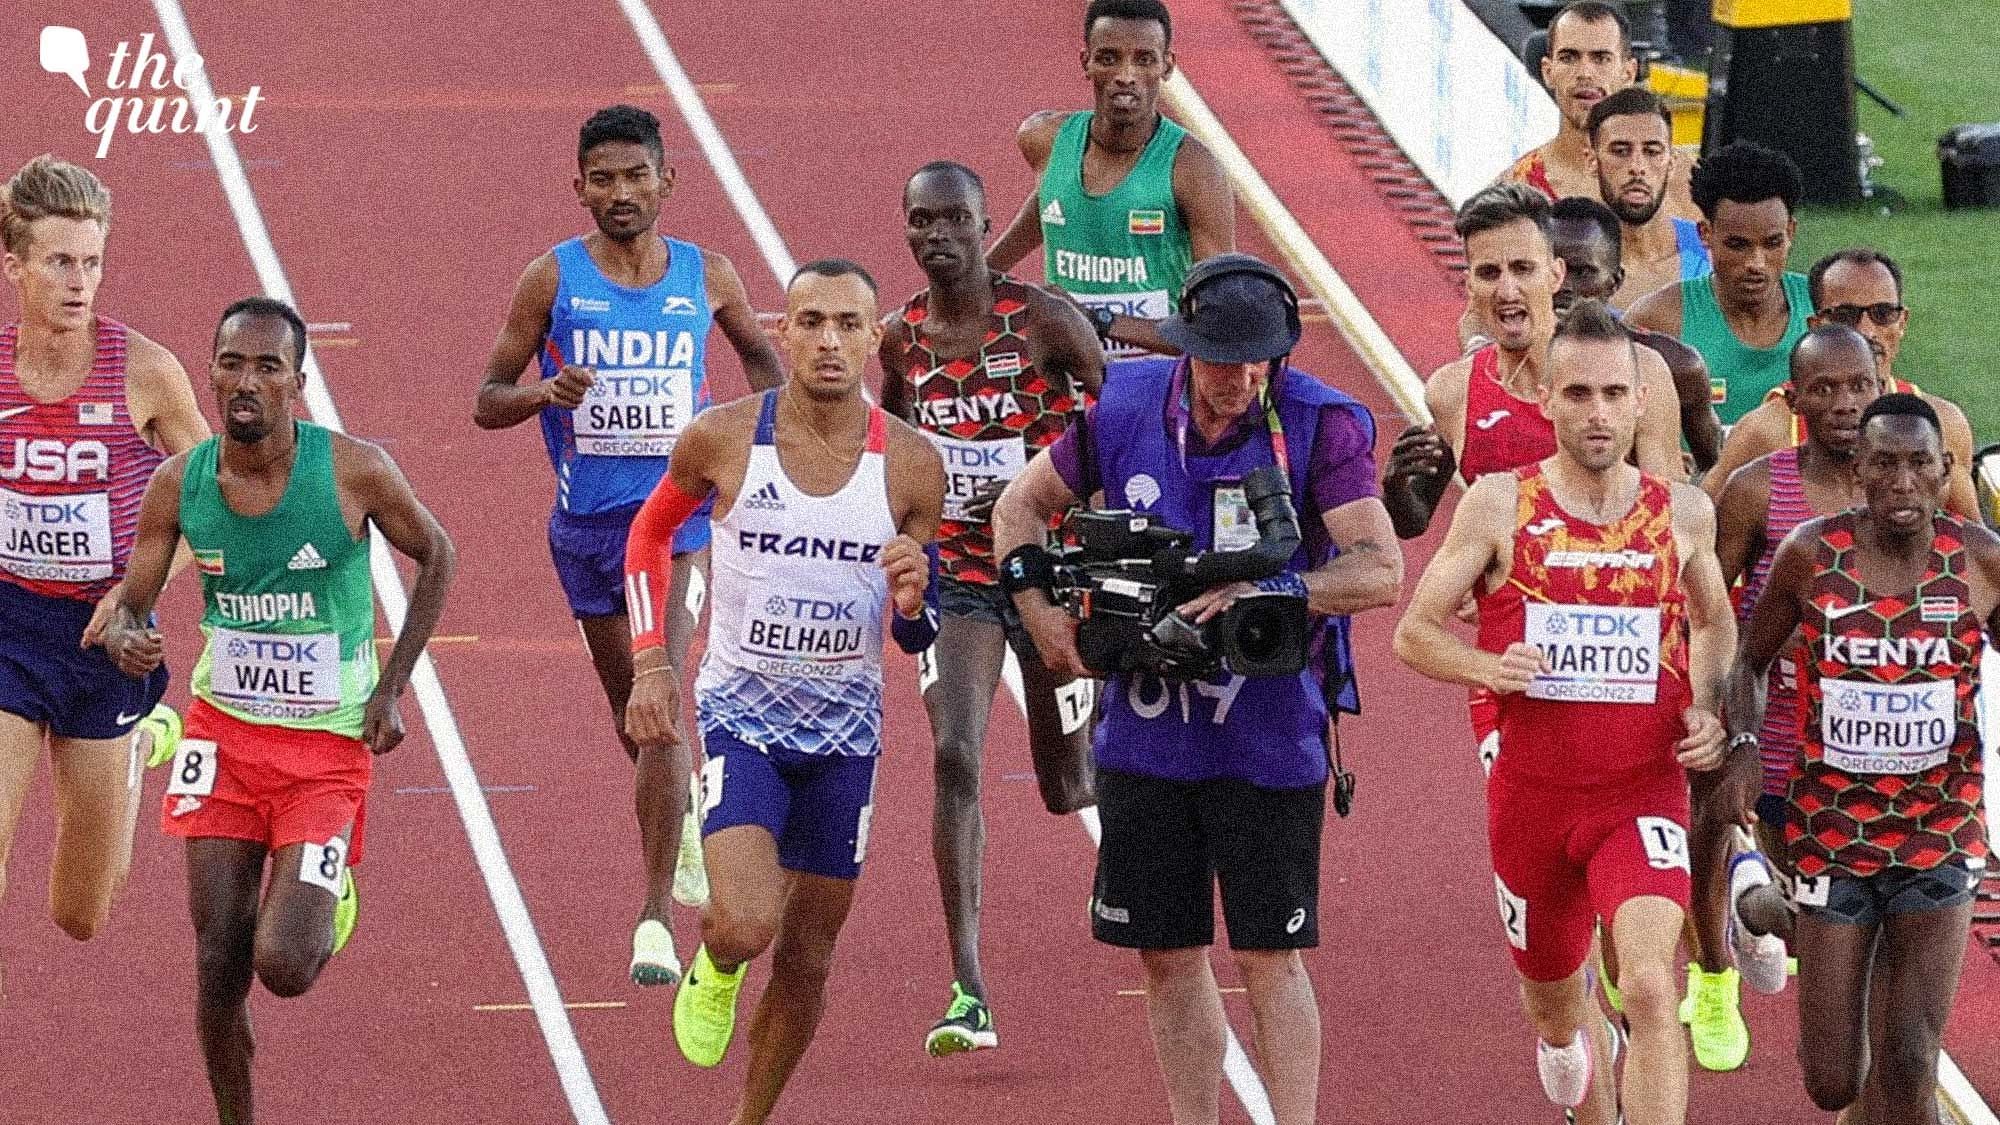 <div class="paragraphs"><p>India's Avinash Sable finished 11th in the 3000m steeplechase final of the World Championships at Oregon recently.&nbsp;&nbsp;</p></div>